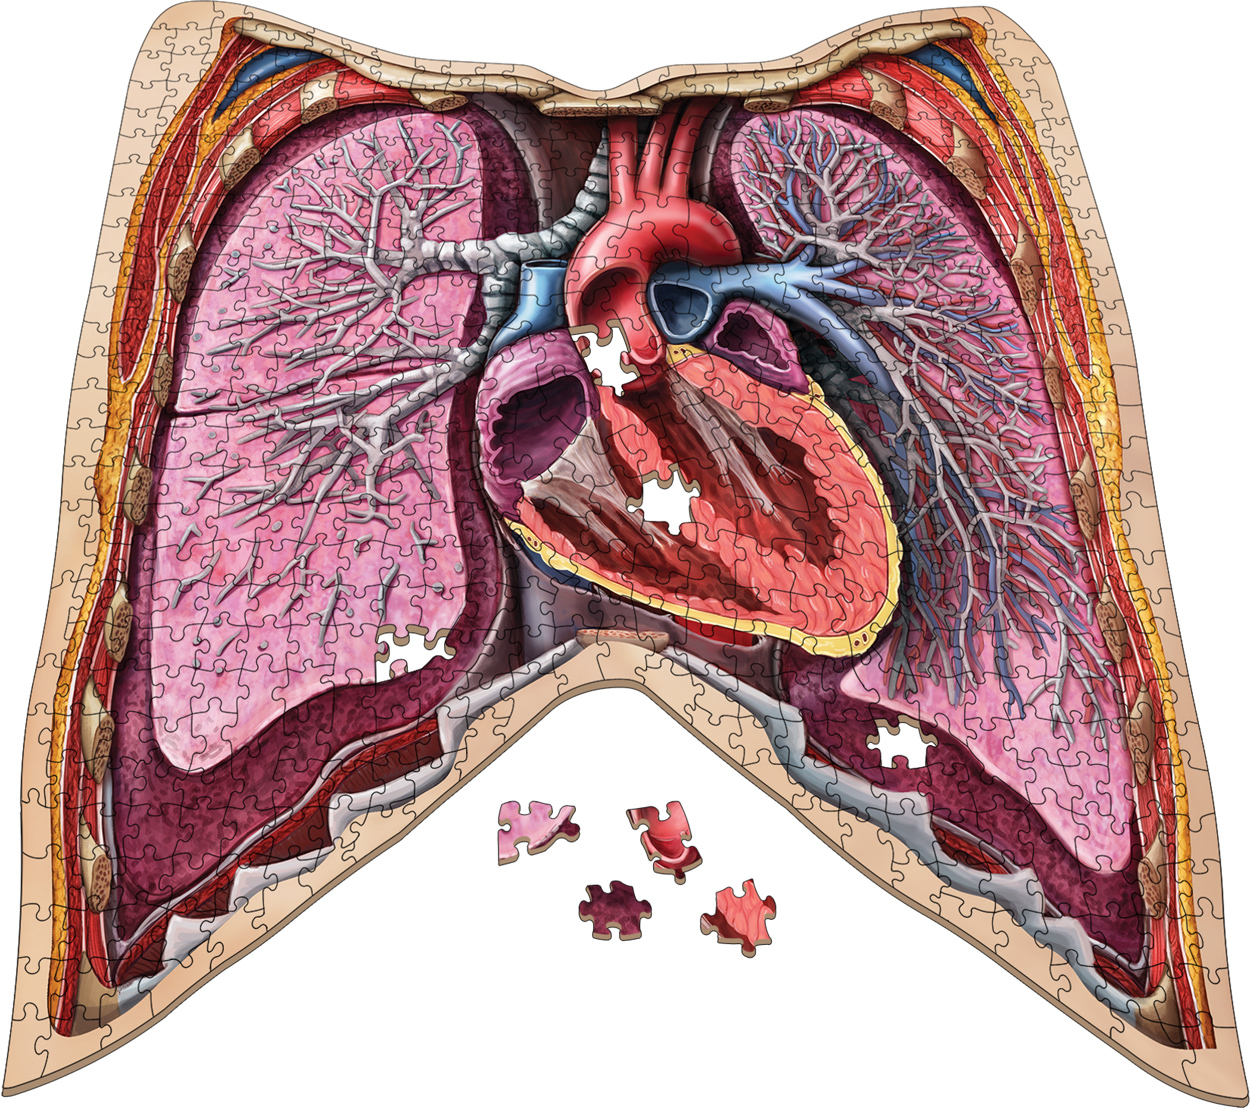 Dr. Livingston's Anatomy Jigsaw Puzzle: The Human Thorax Science Shaped Puzzle